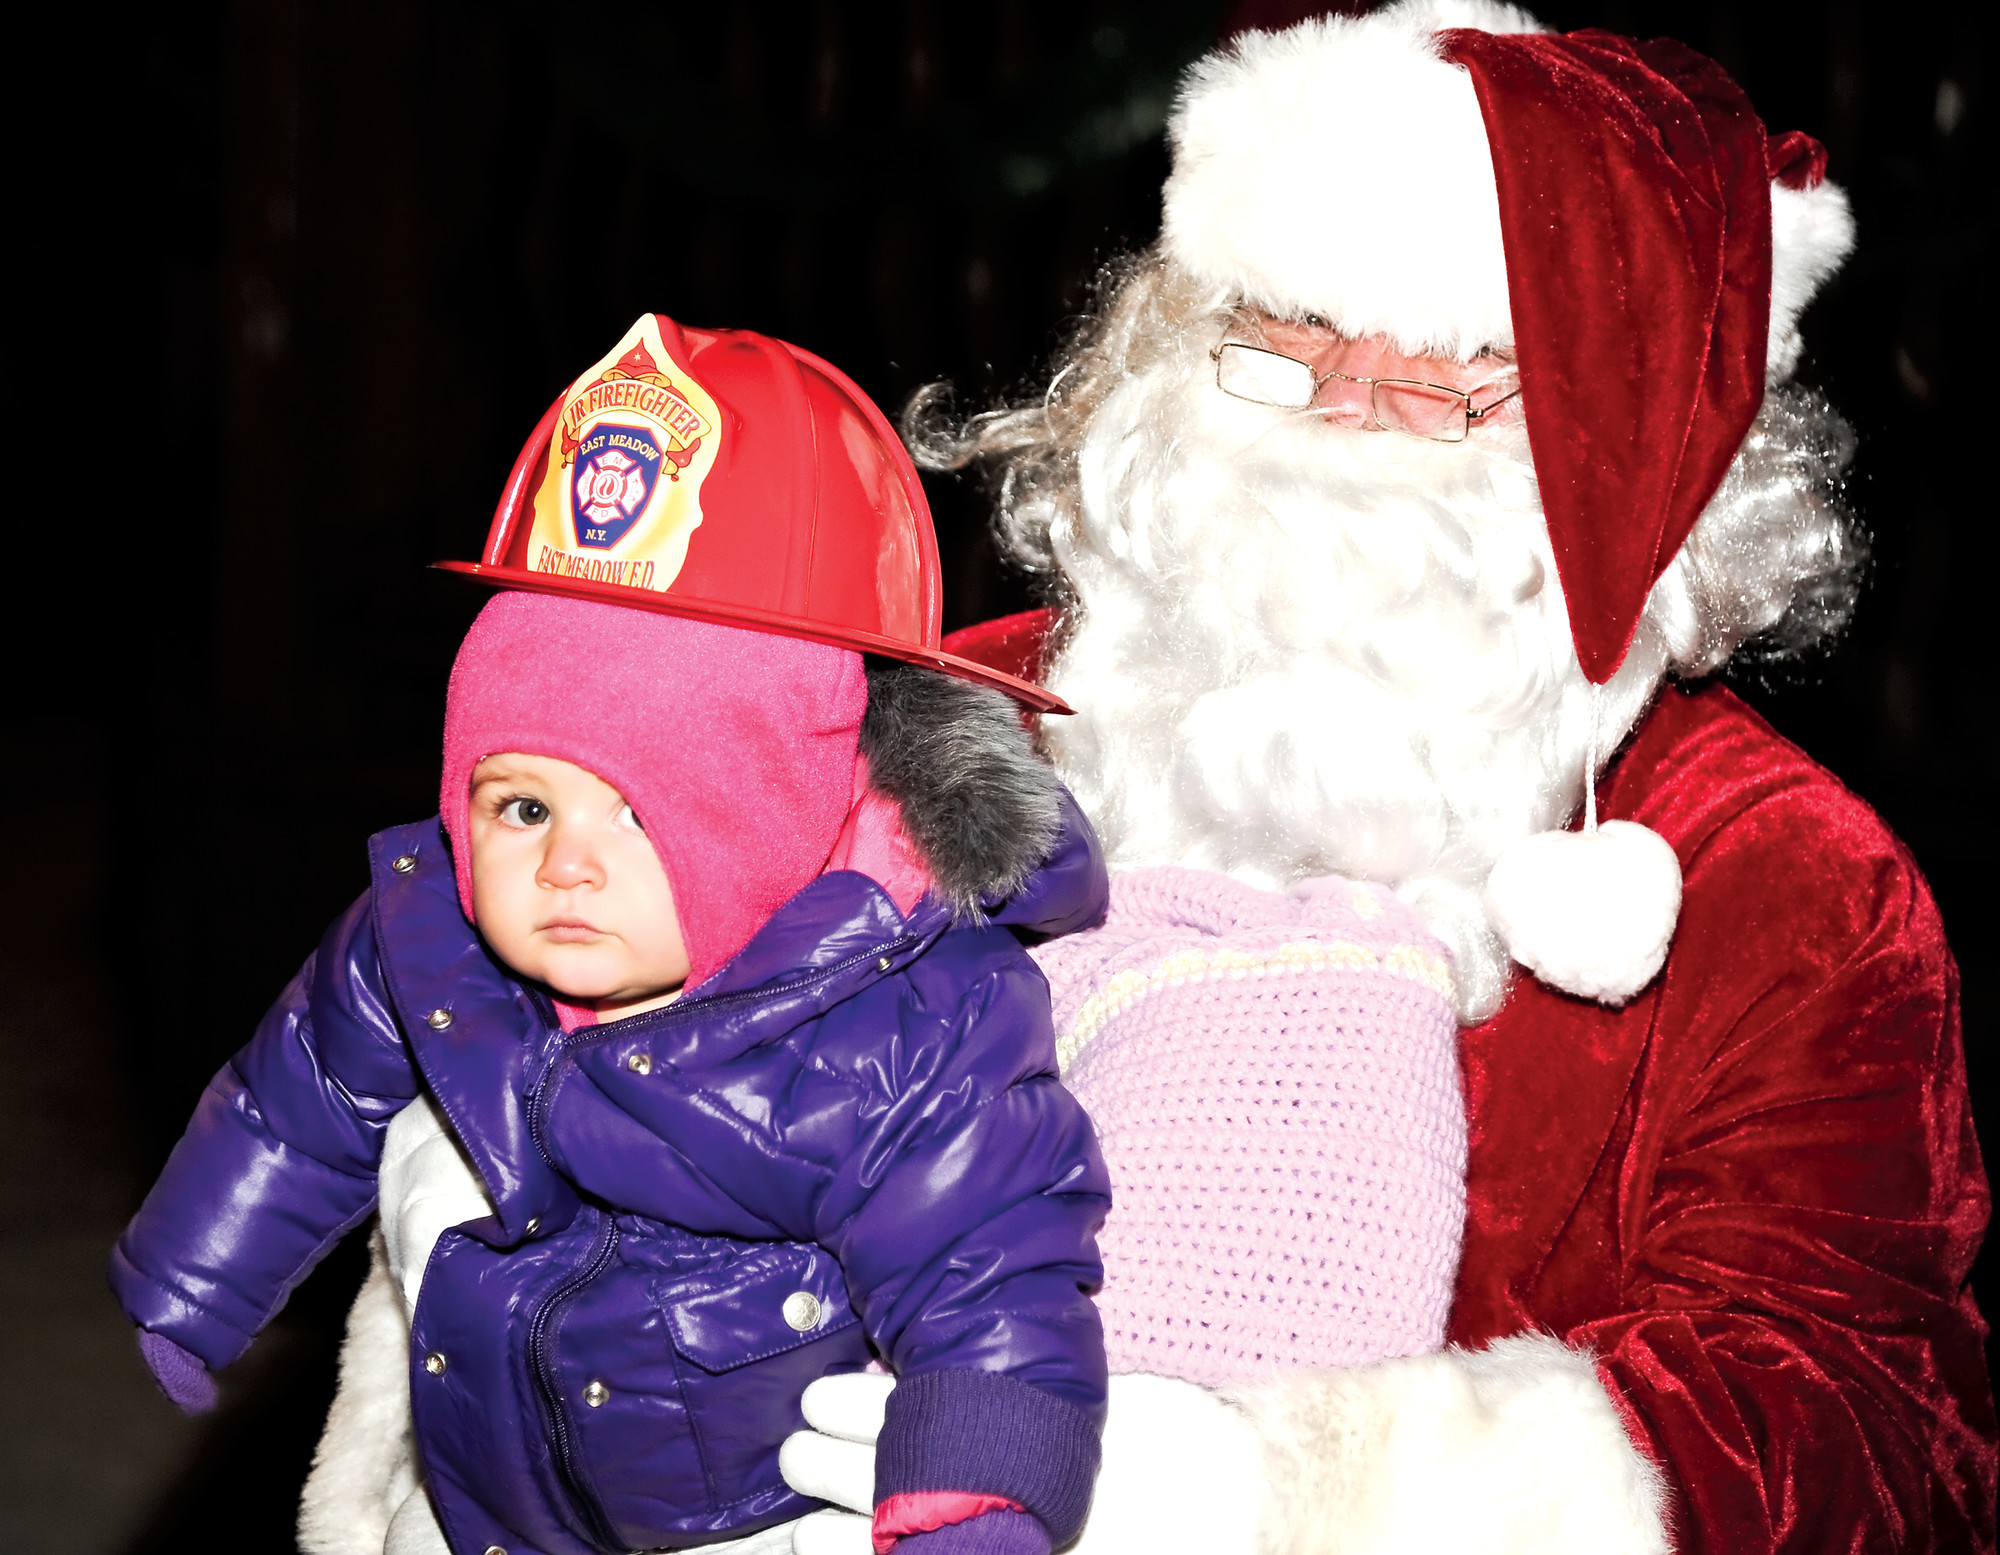 Julia Terzulli, 10 months old and a junior firefighting in training, sat with Santa.